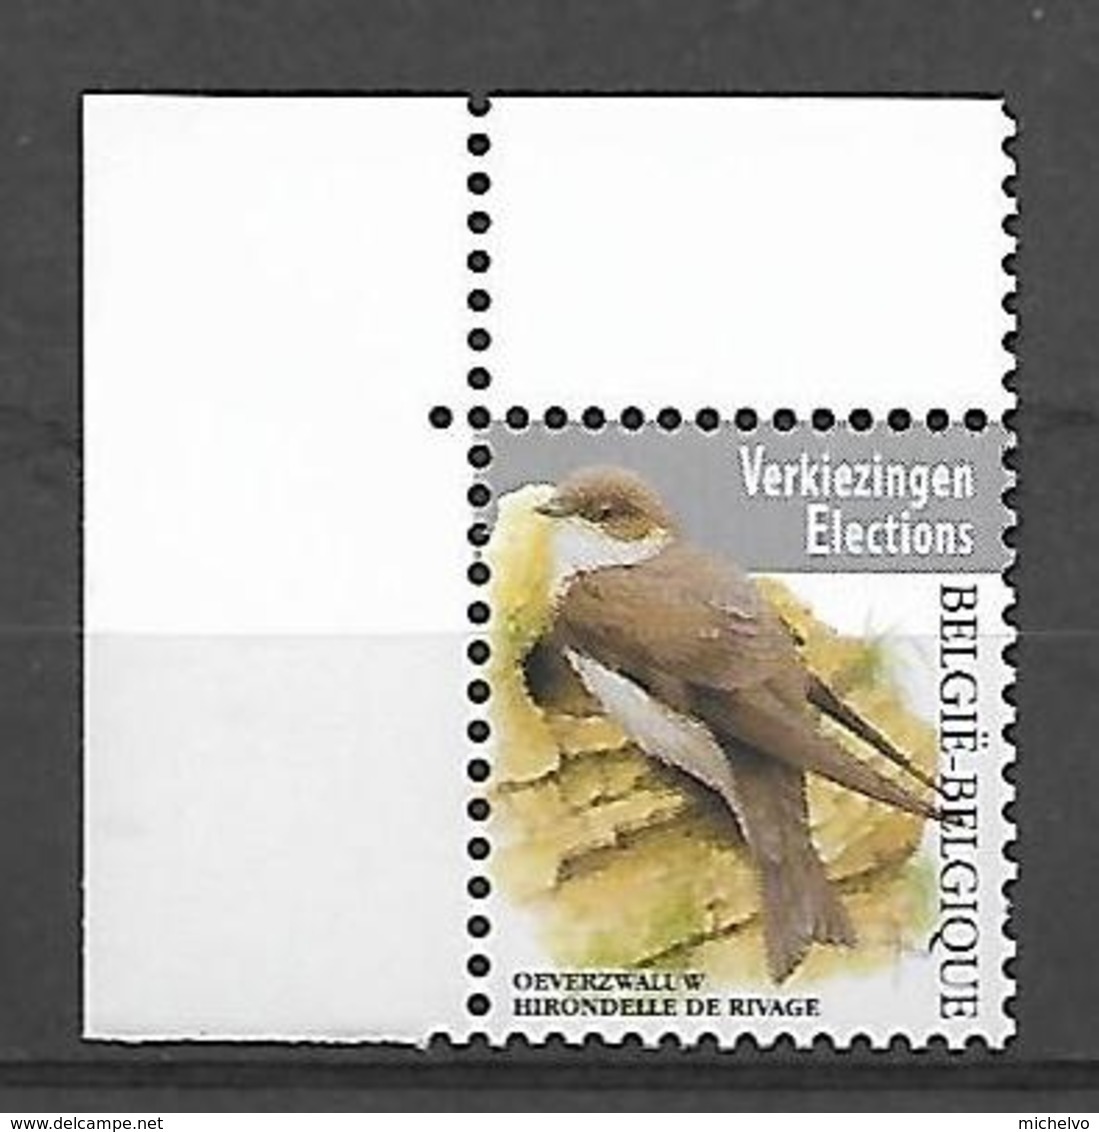 Belg. 2019 - Hirondelle De Rivage (timbre Elections) ** - Unused Stamps